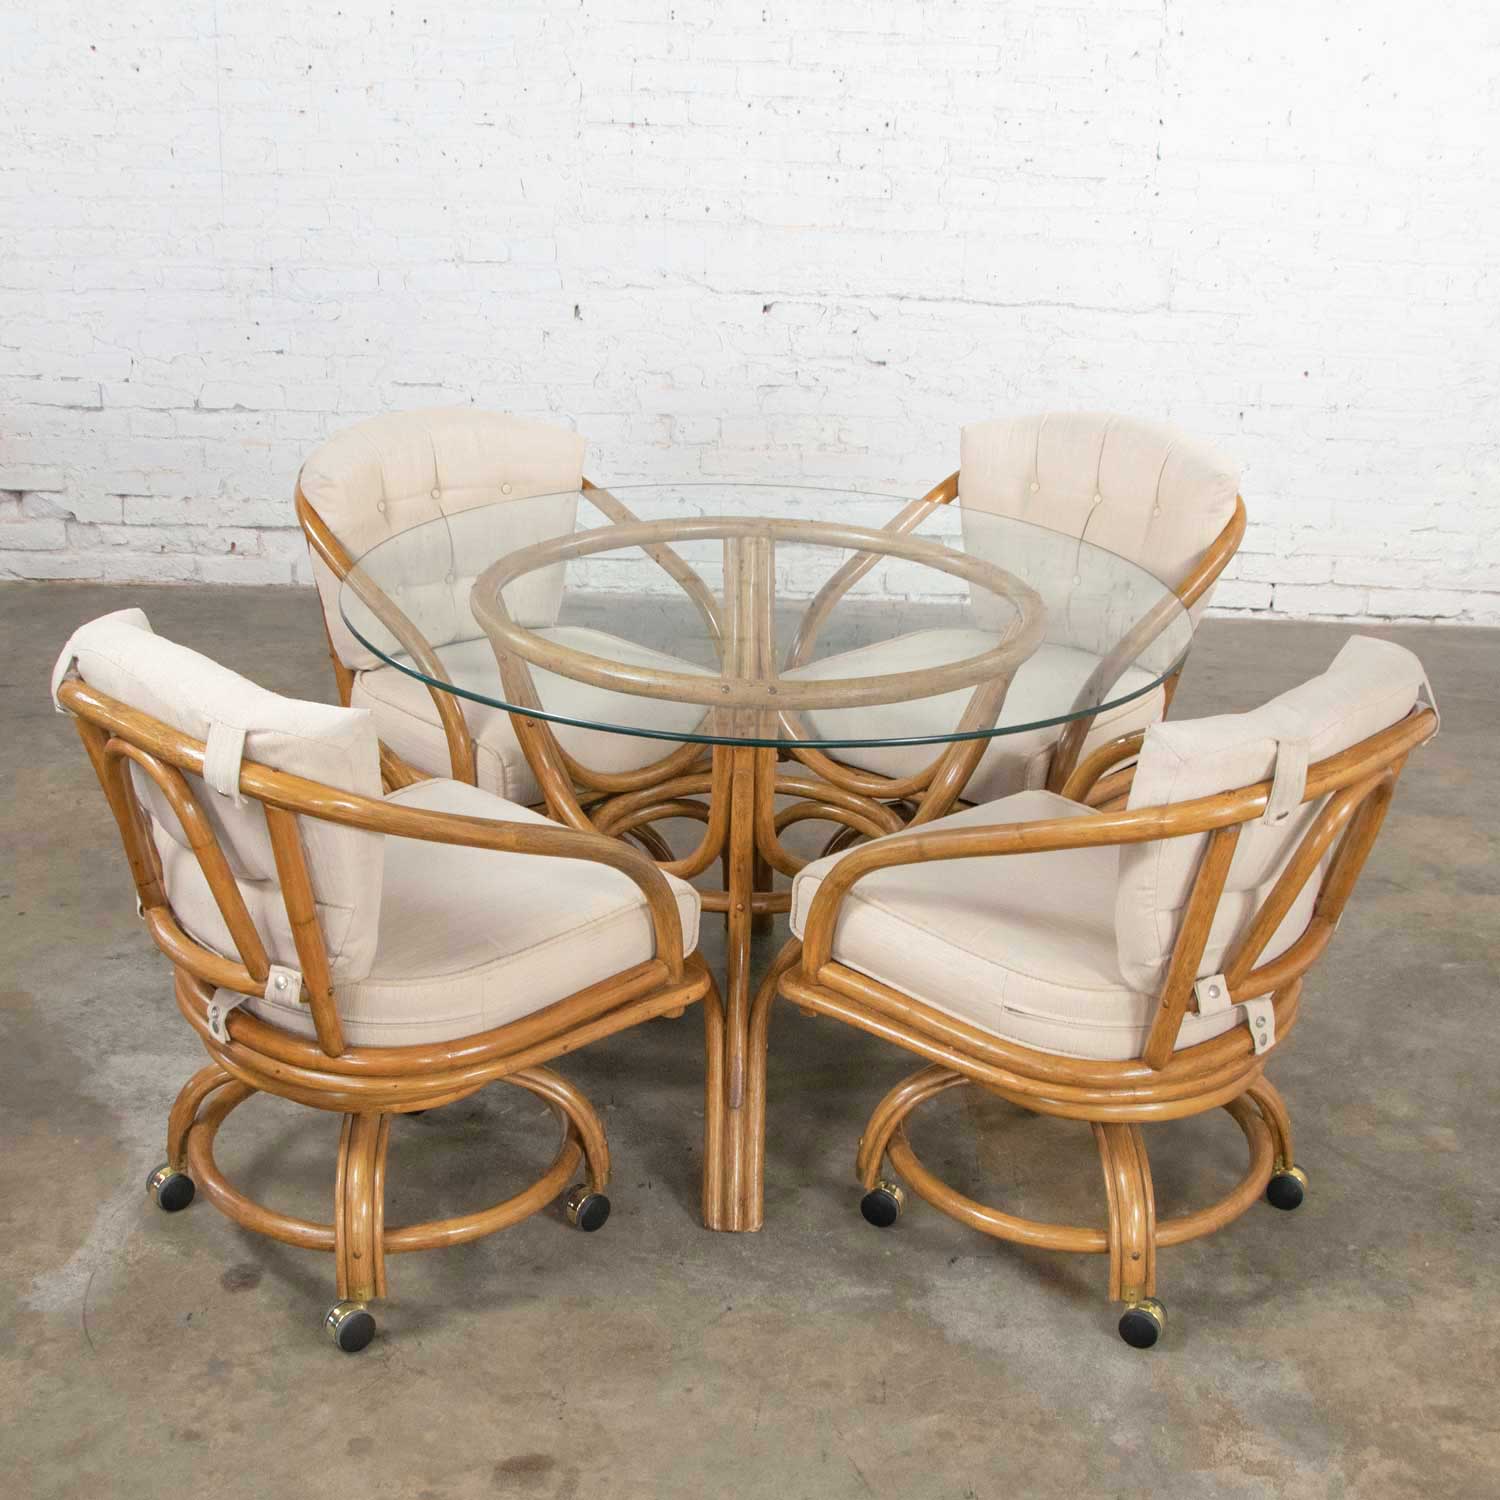 Vintage Rattan Game Table Set Round Glass Top Table & 4 Swivel Rolling